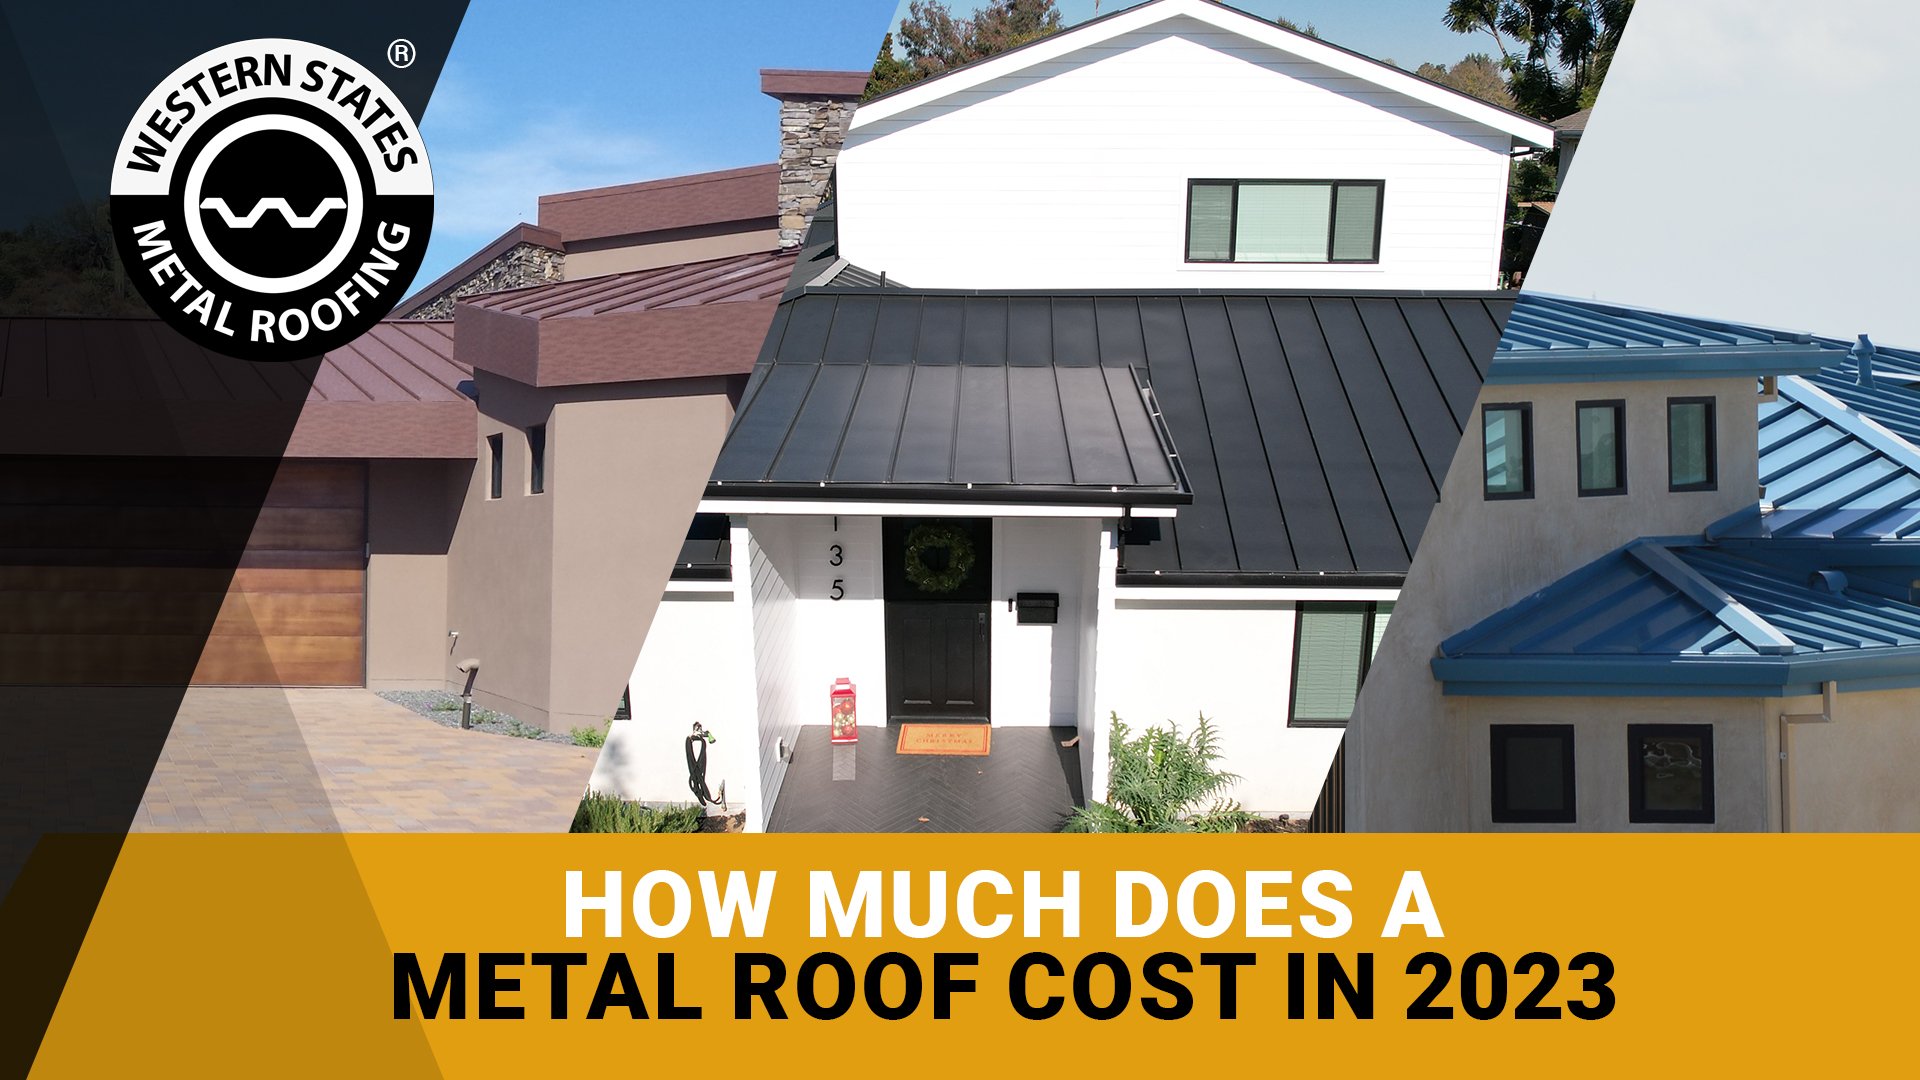 How Much Does A Metal Roof Cost in 2023